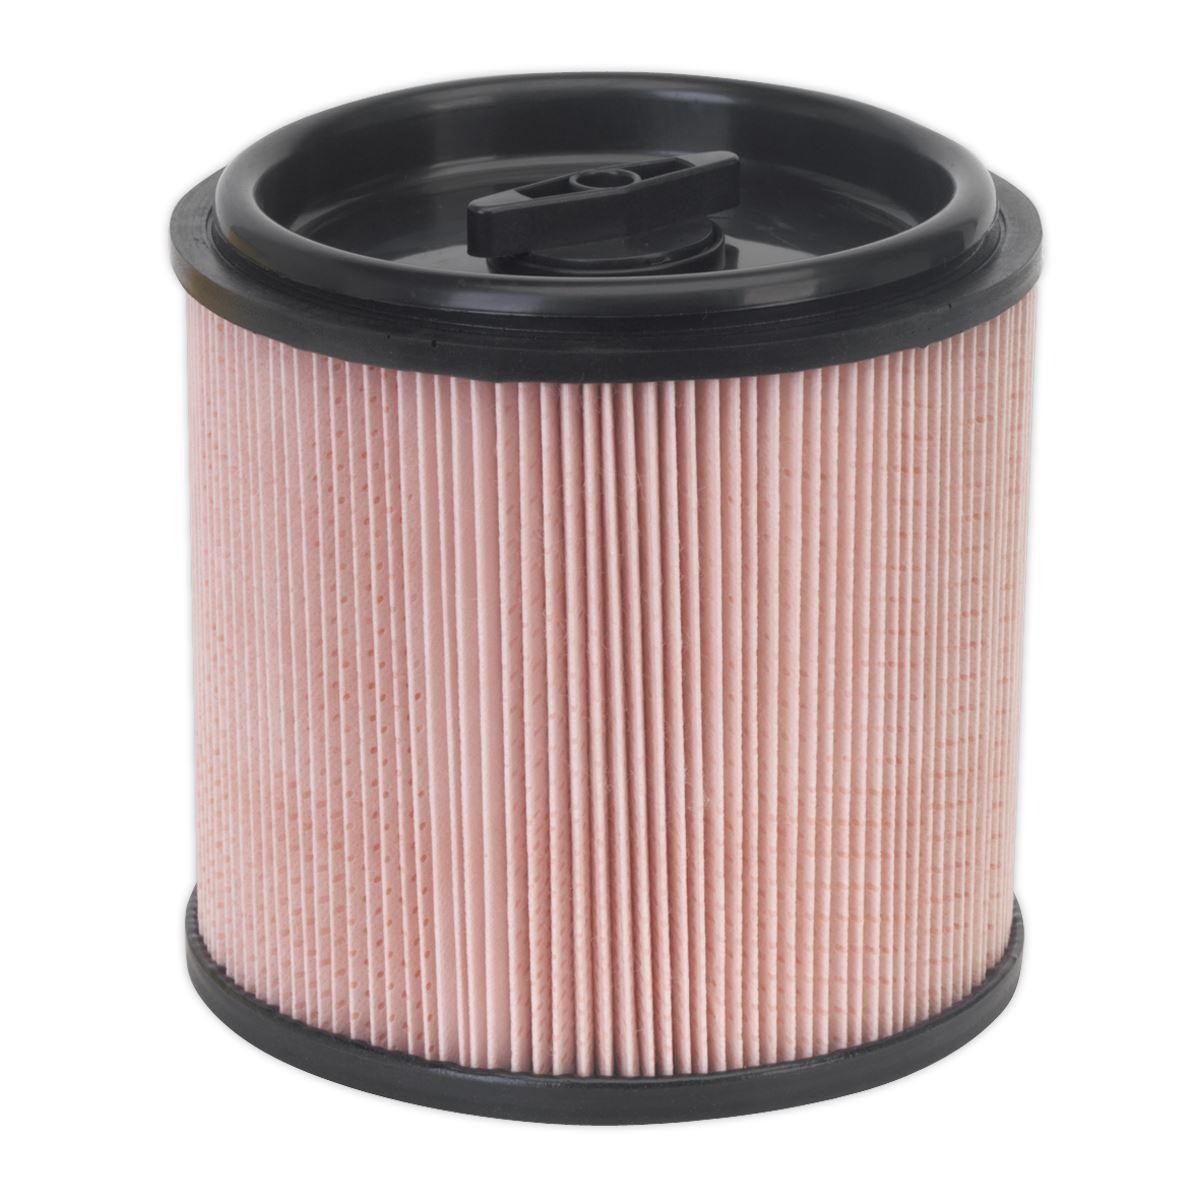 Sealey Cartridge Filter for Fine Dust for PC200 & PC300 Series